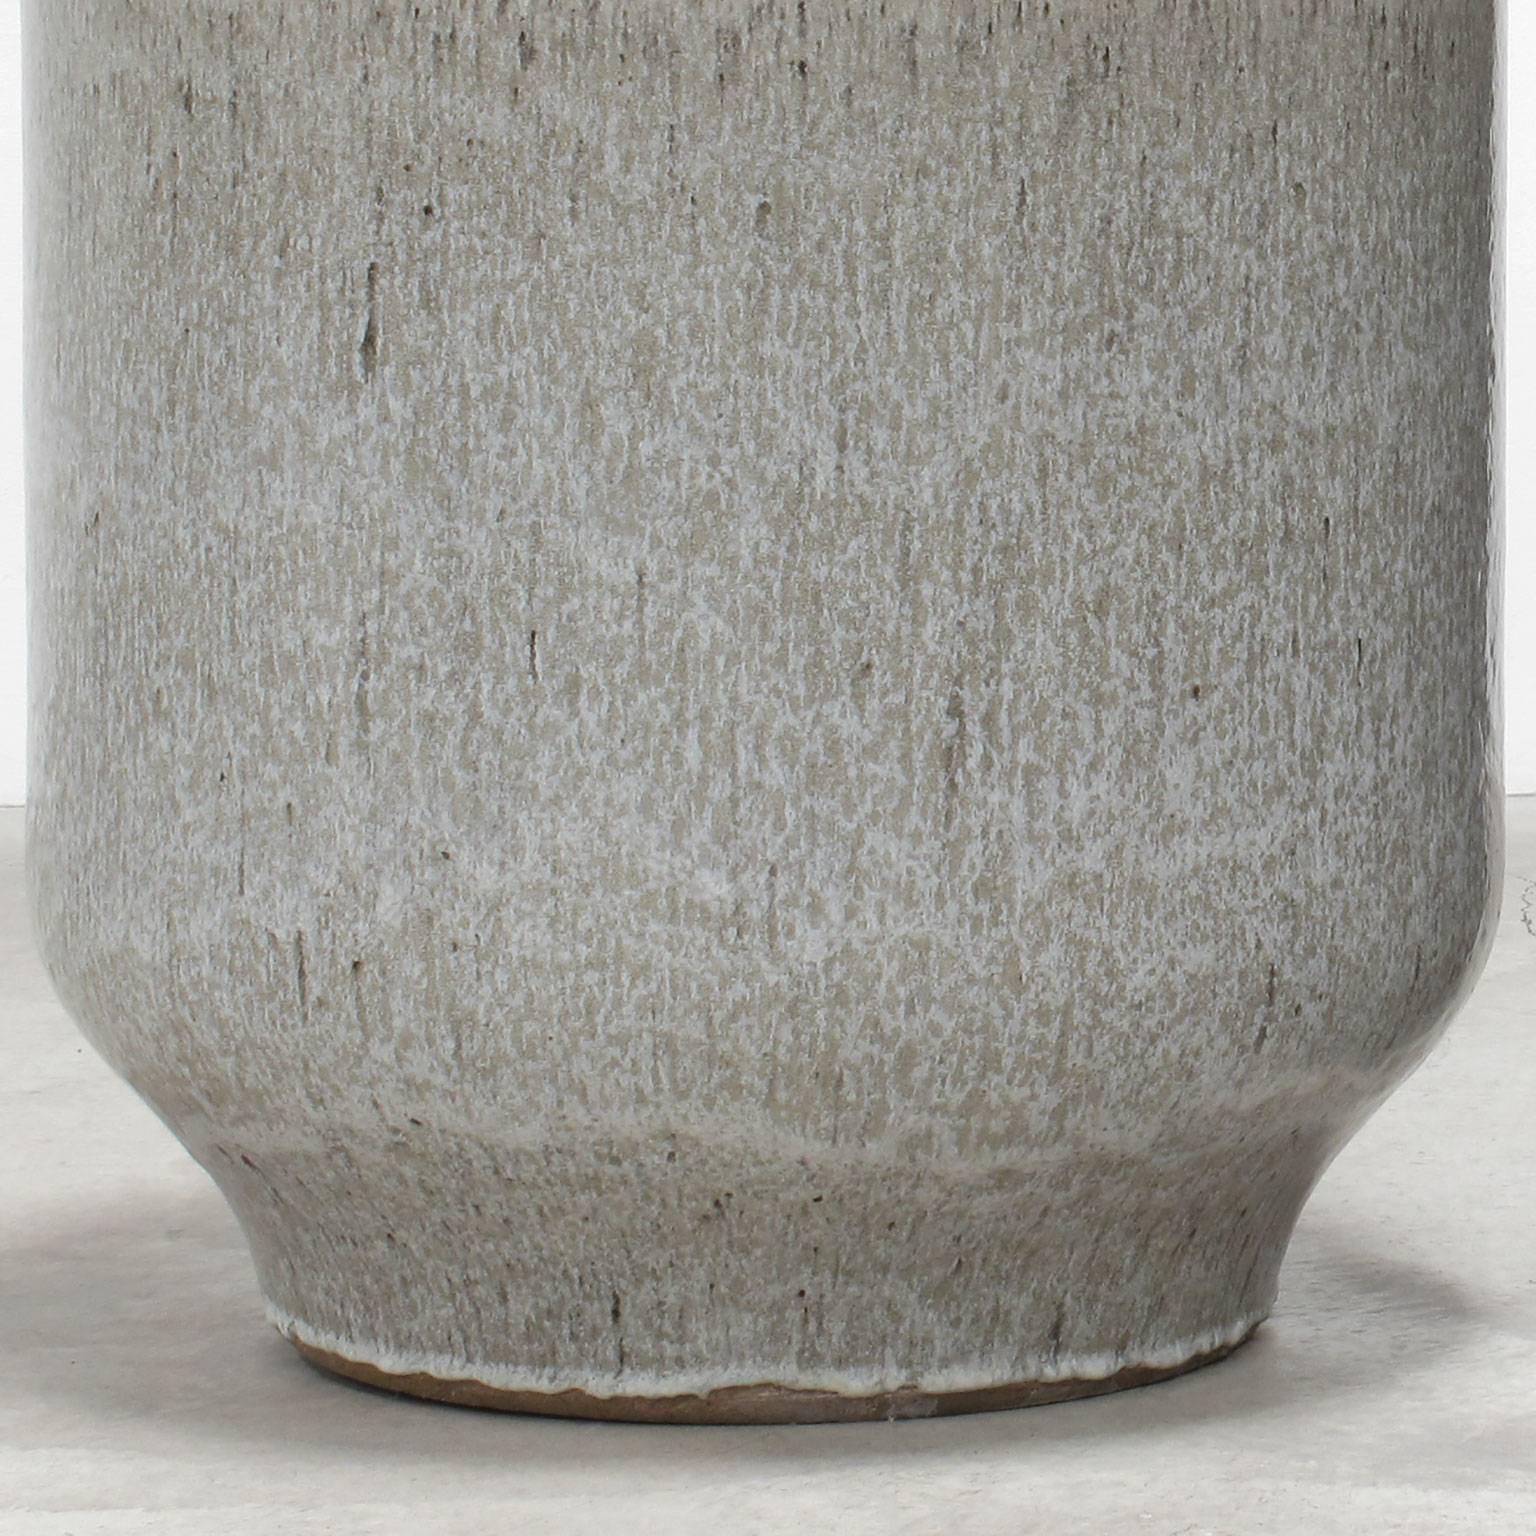 David Cressey and Robert Maxwell Large Glazed Grey Ceramic Planter, 1970s In Excellent Condition For Sale In Los Angeles, CA